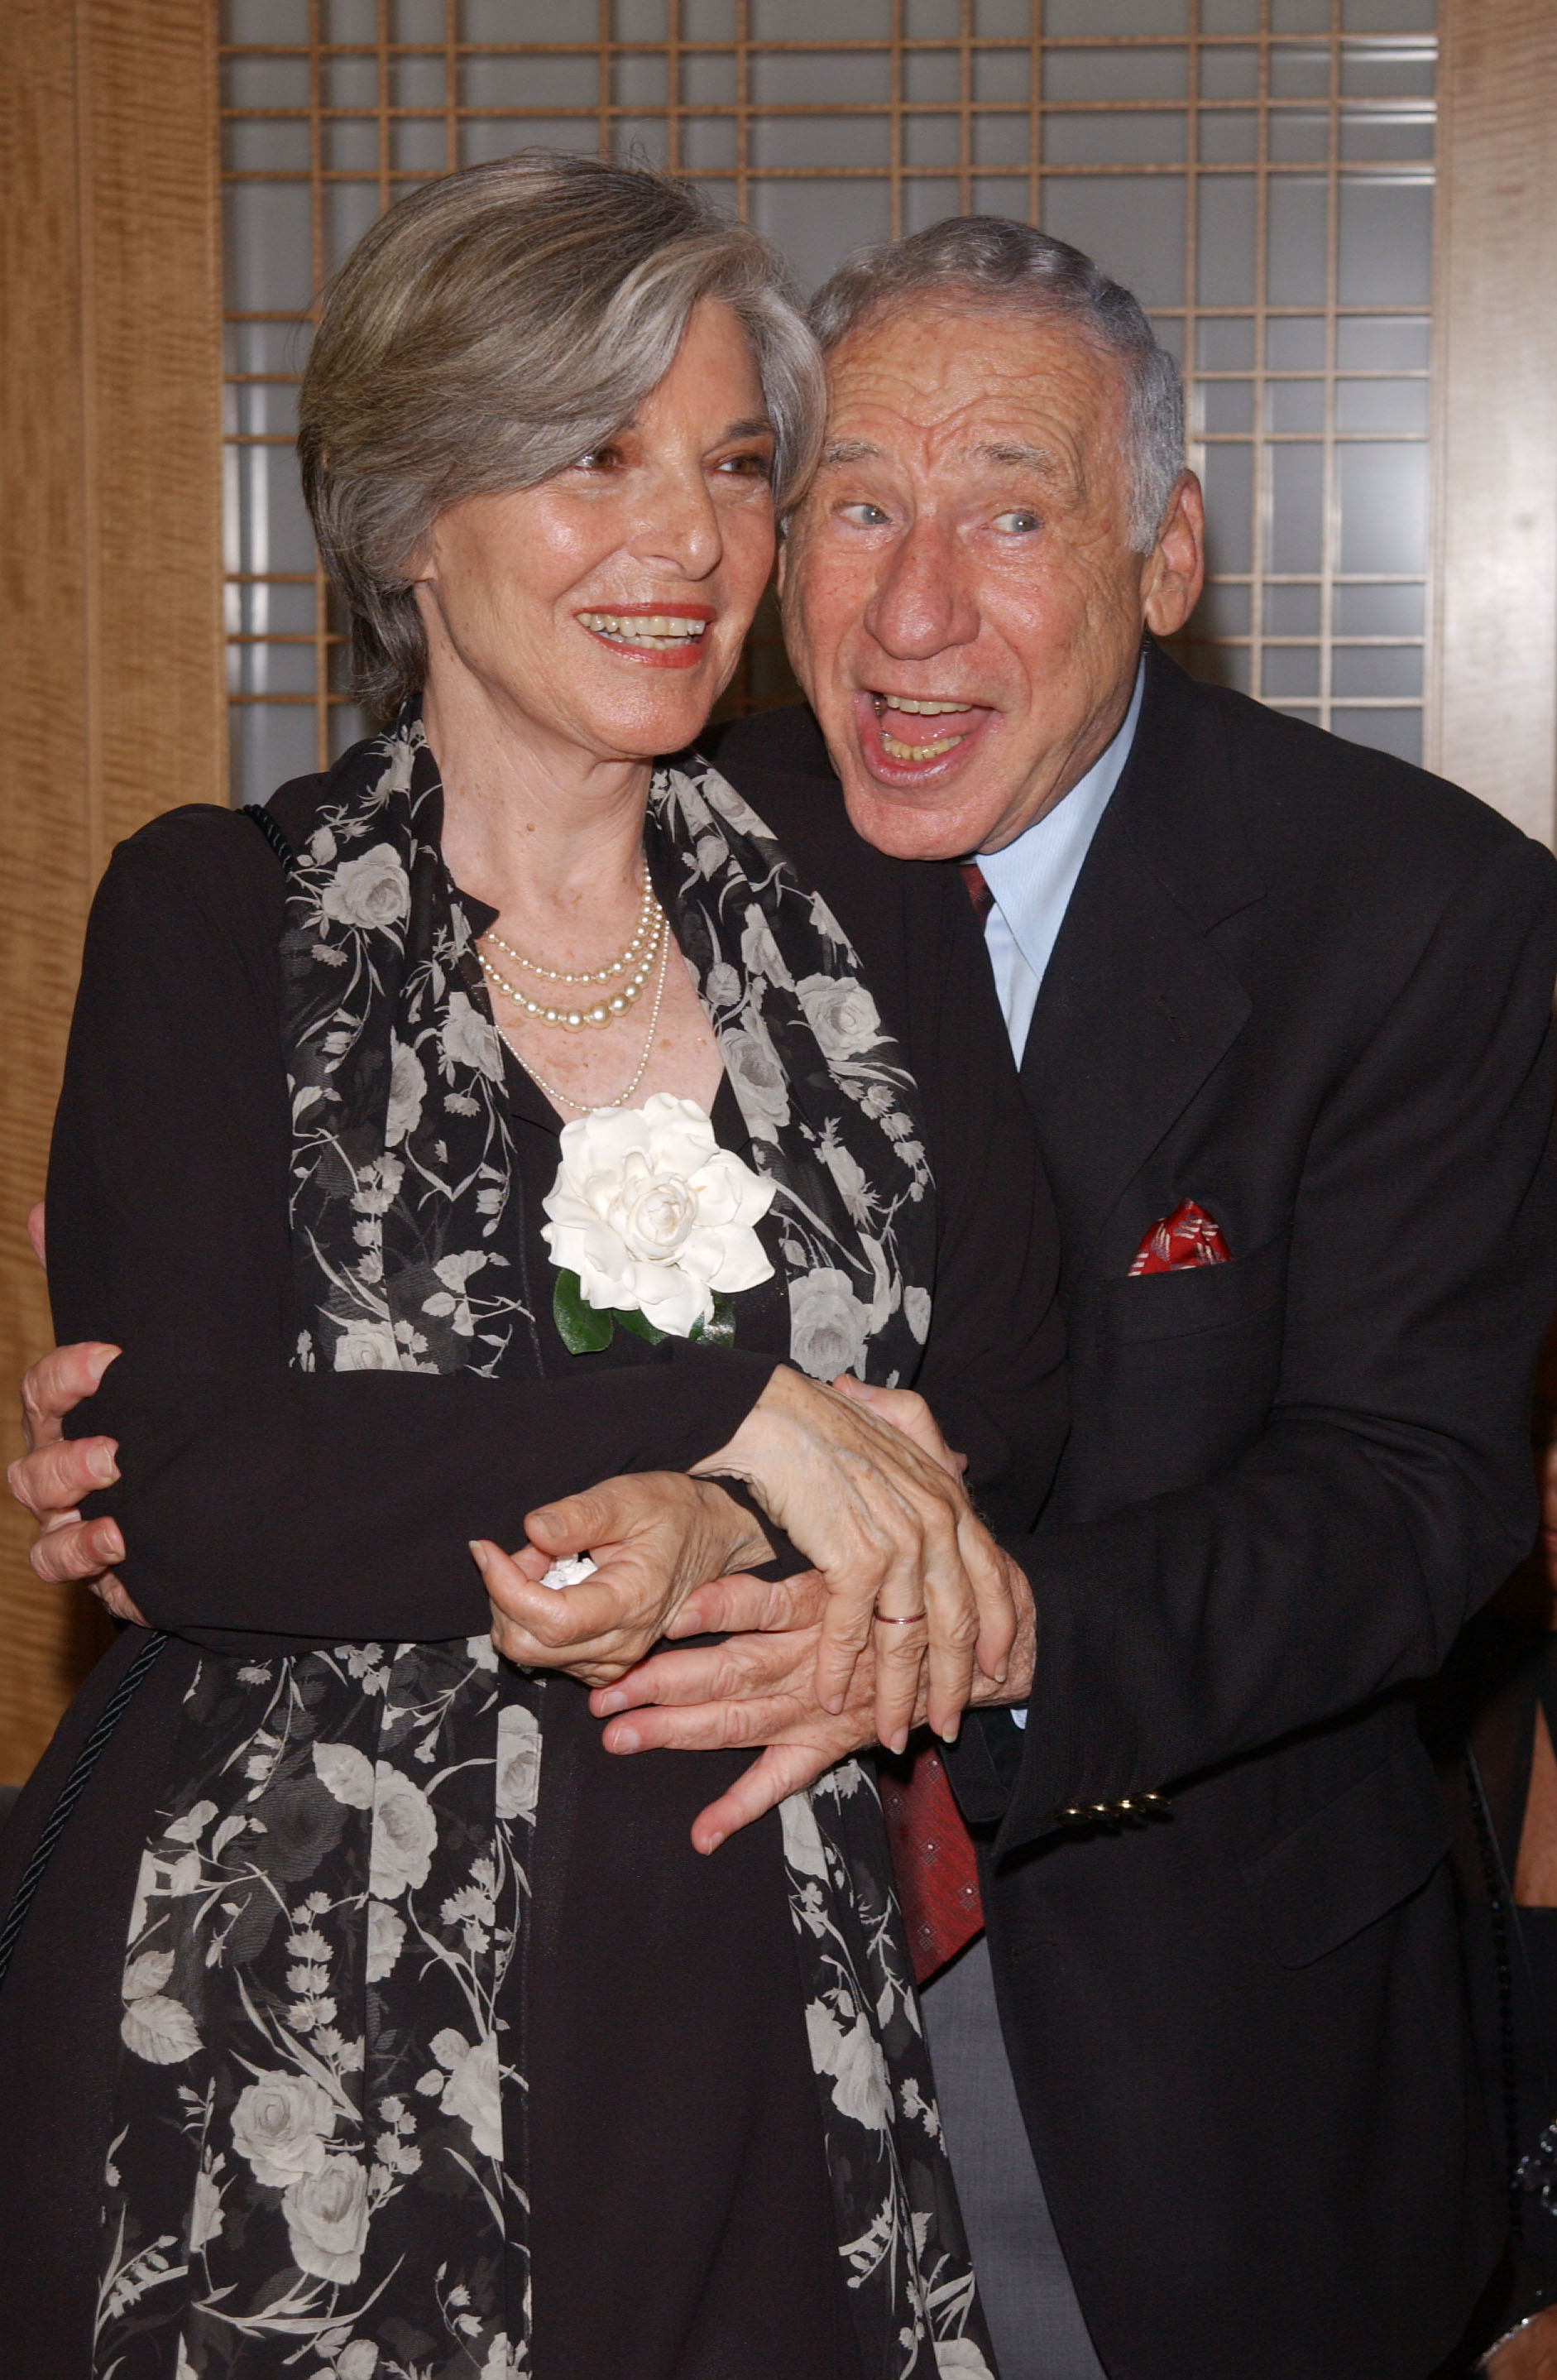 Mel Brooks and Anne Bancroft in New York City, on June 24, 2002. | Source: Getty Images